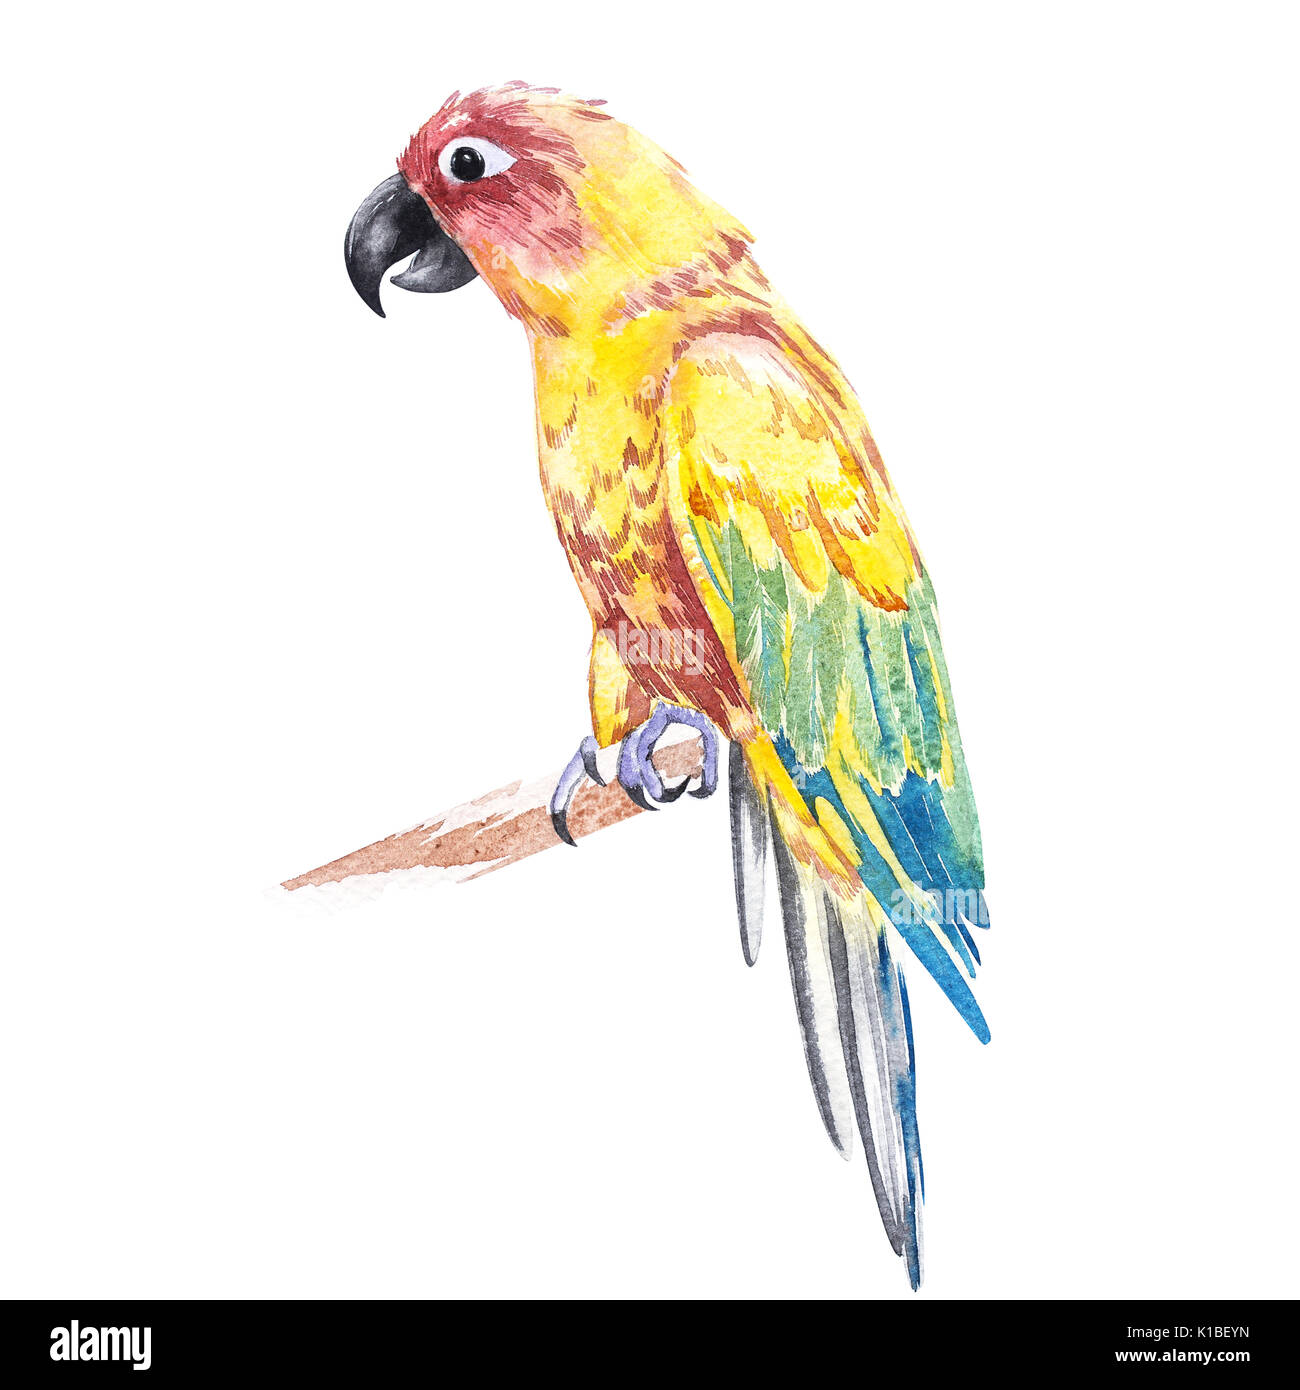 Parrot watercolor illustration isolated on white background. Stock Photo